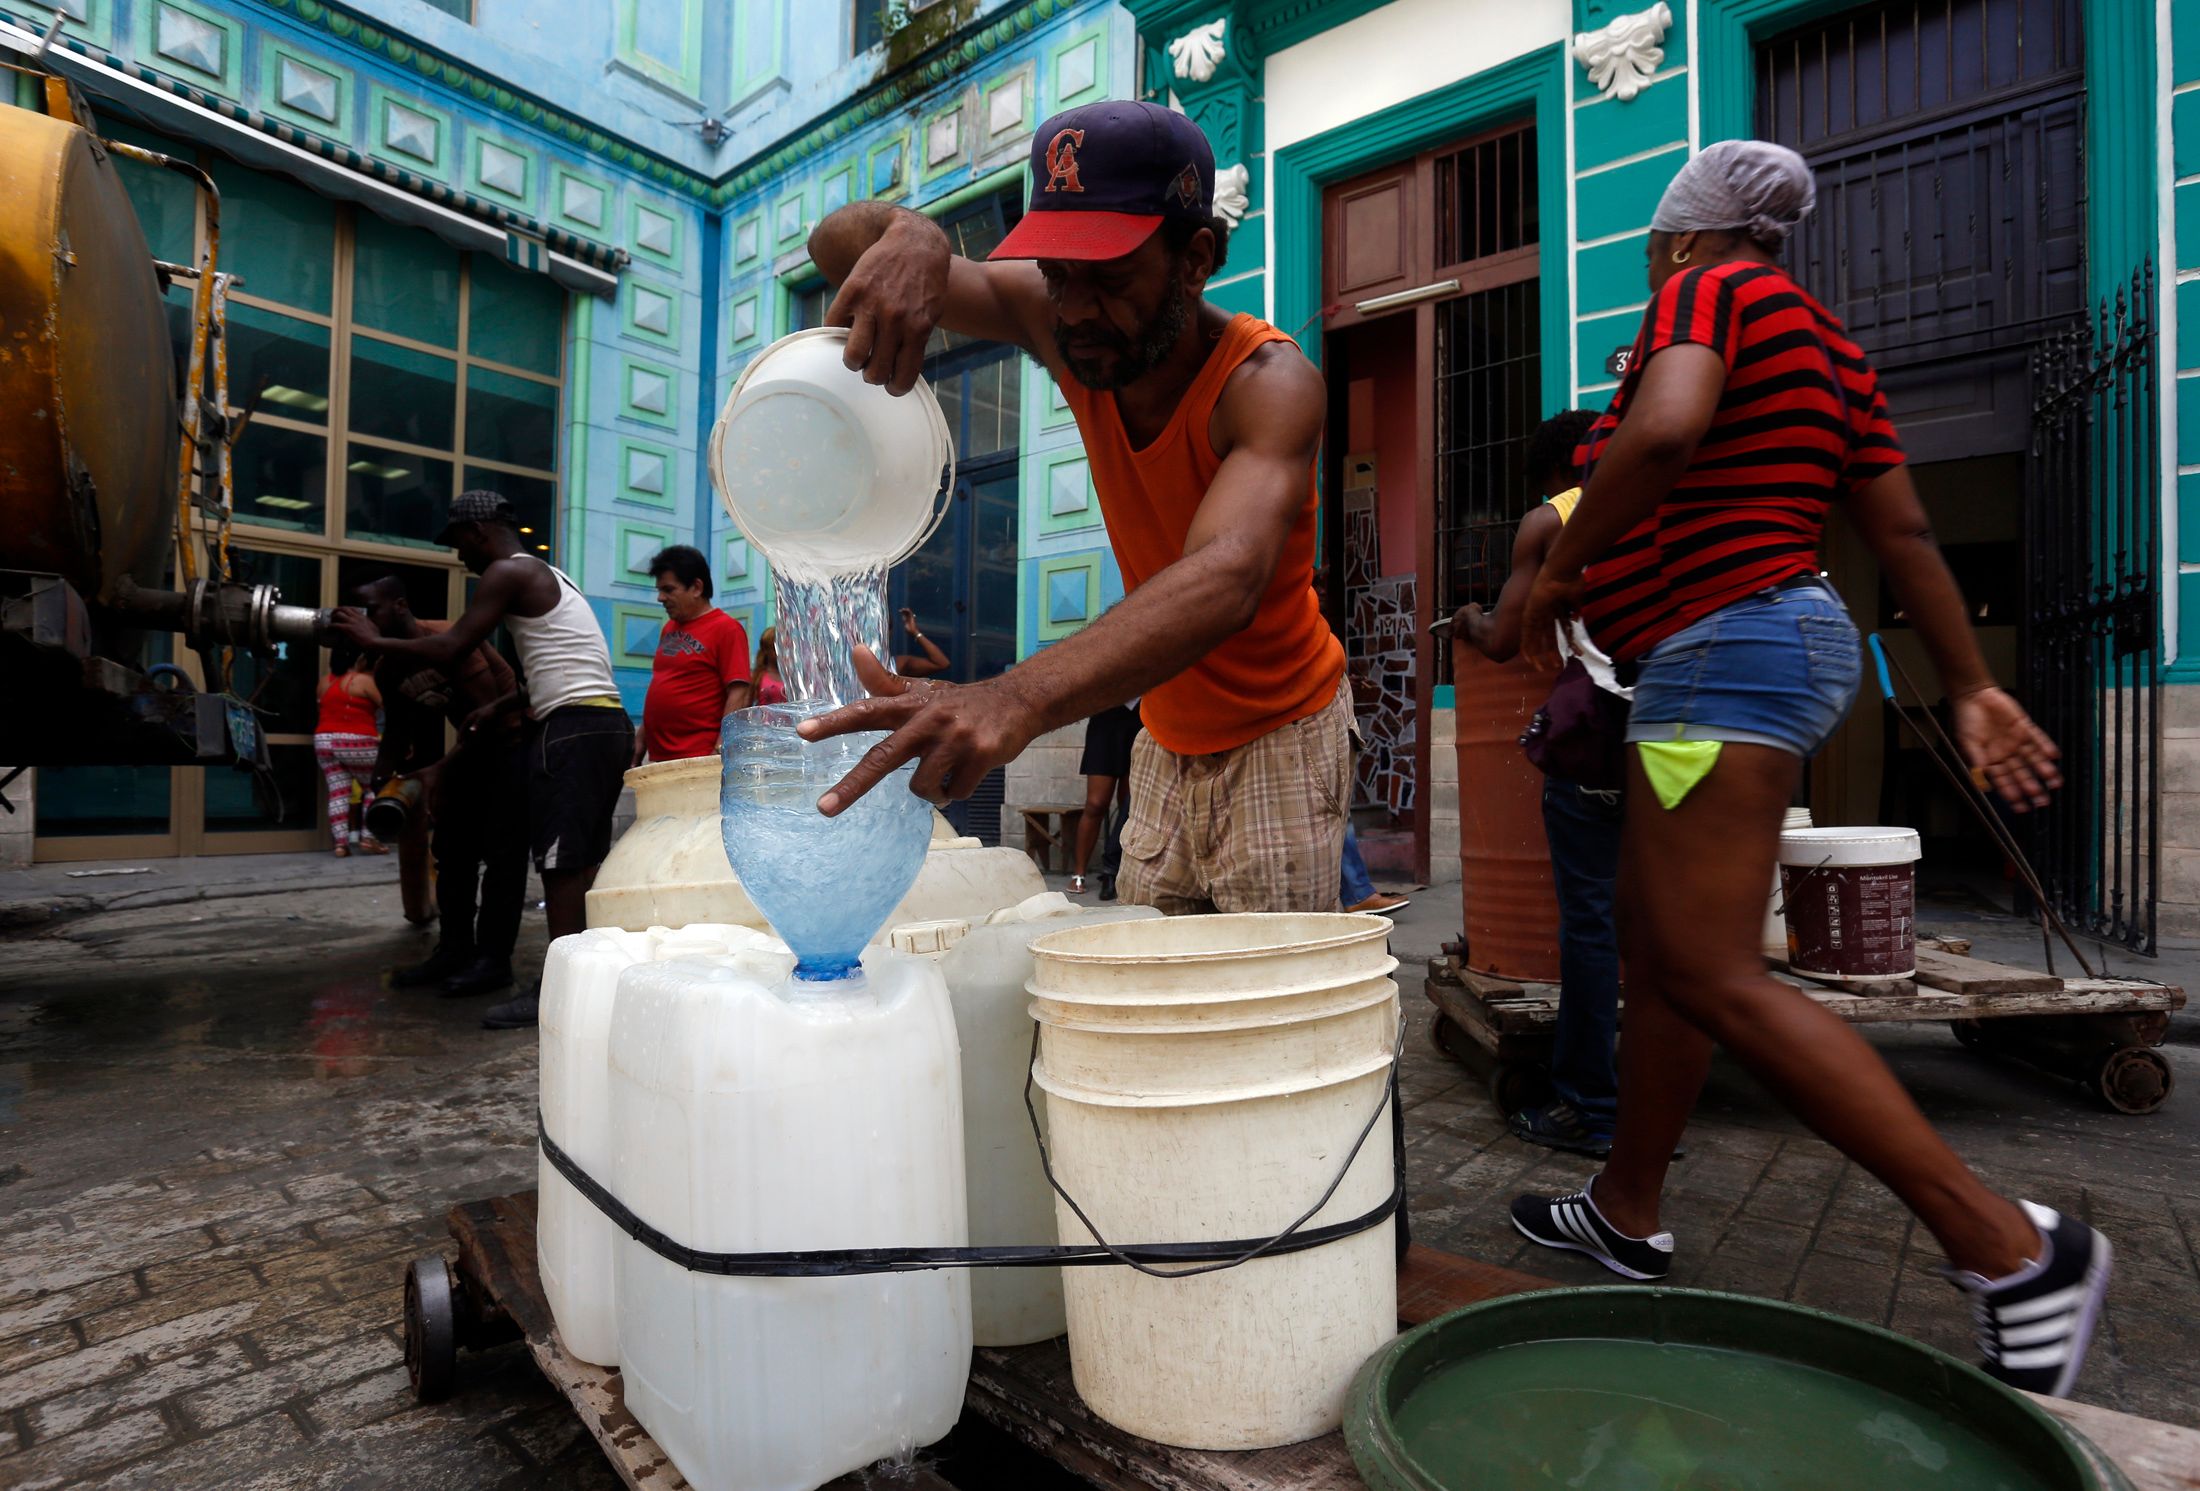 A person pouring water in Cuba